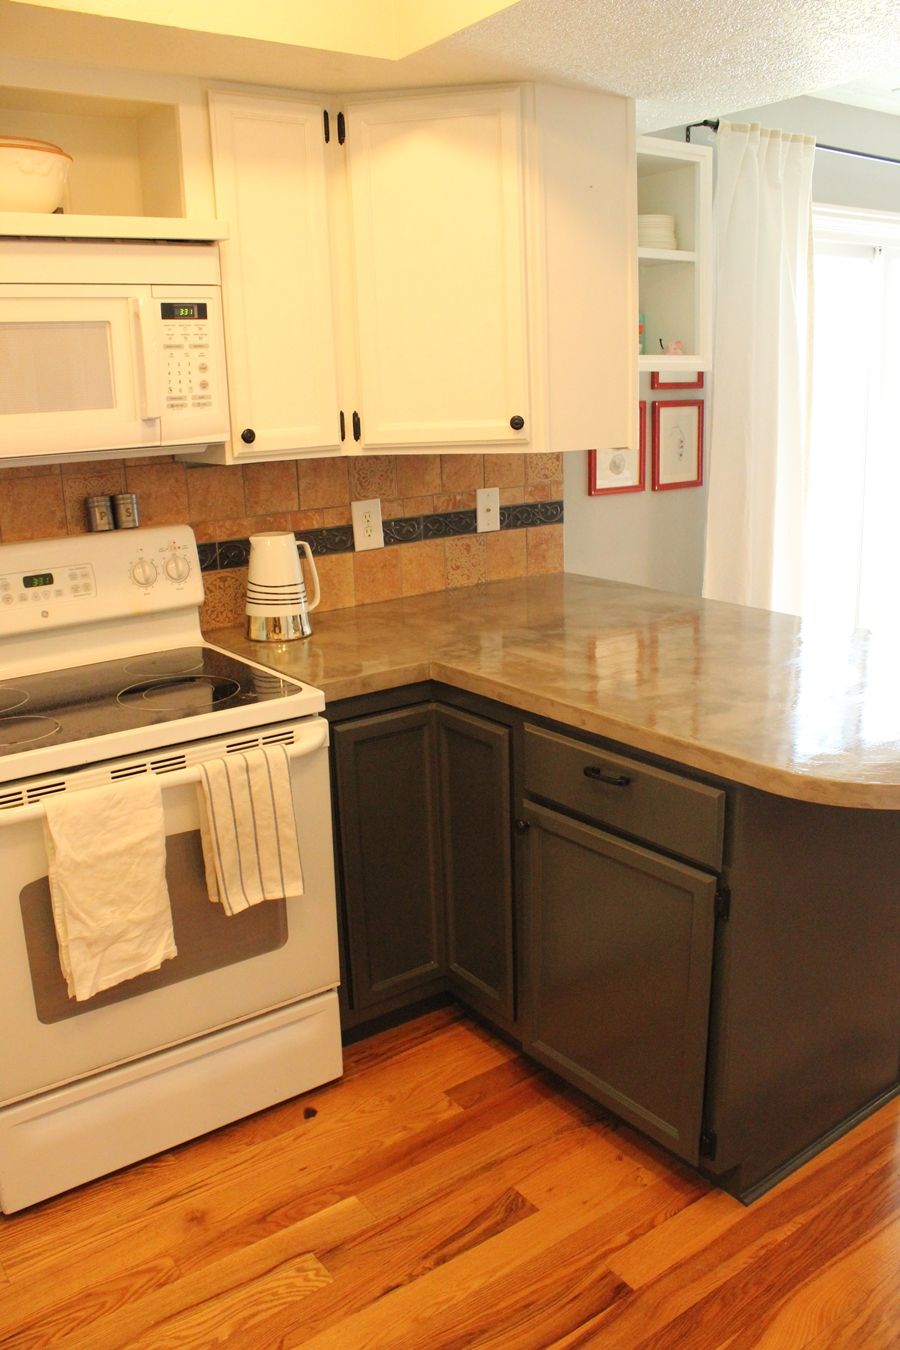 How To Install DIY Concrete Kitchen Countertops: Tutorial